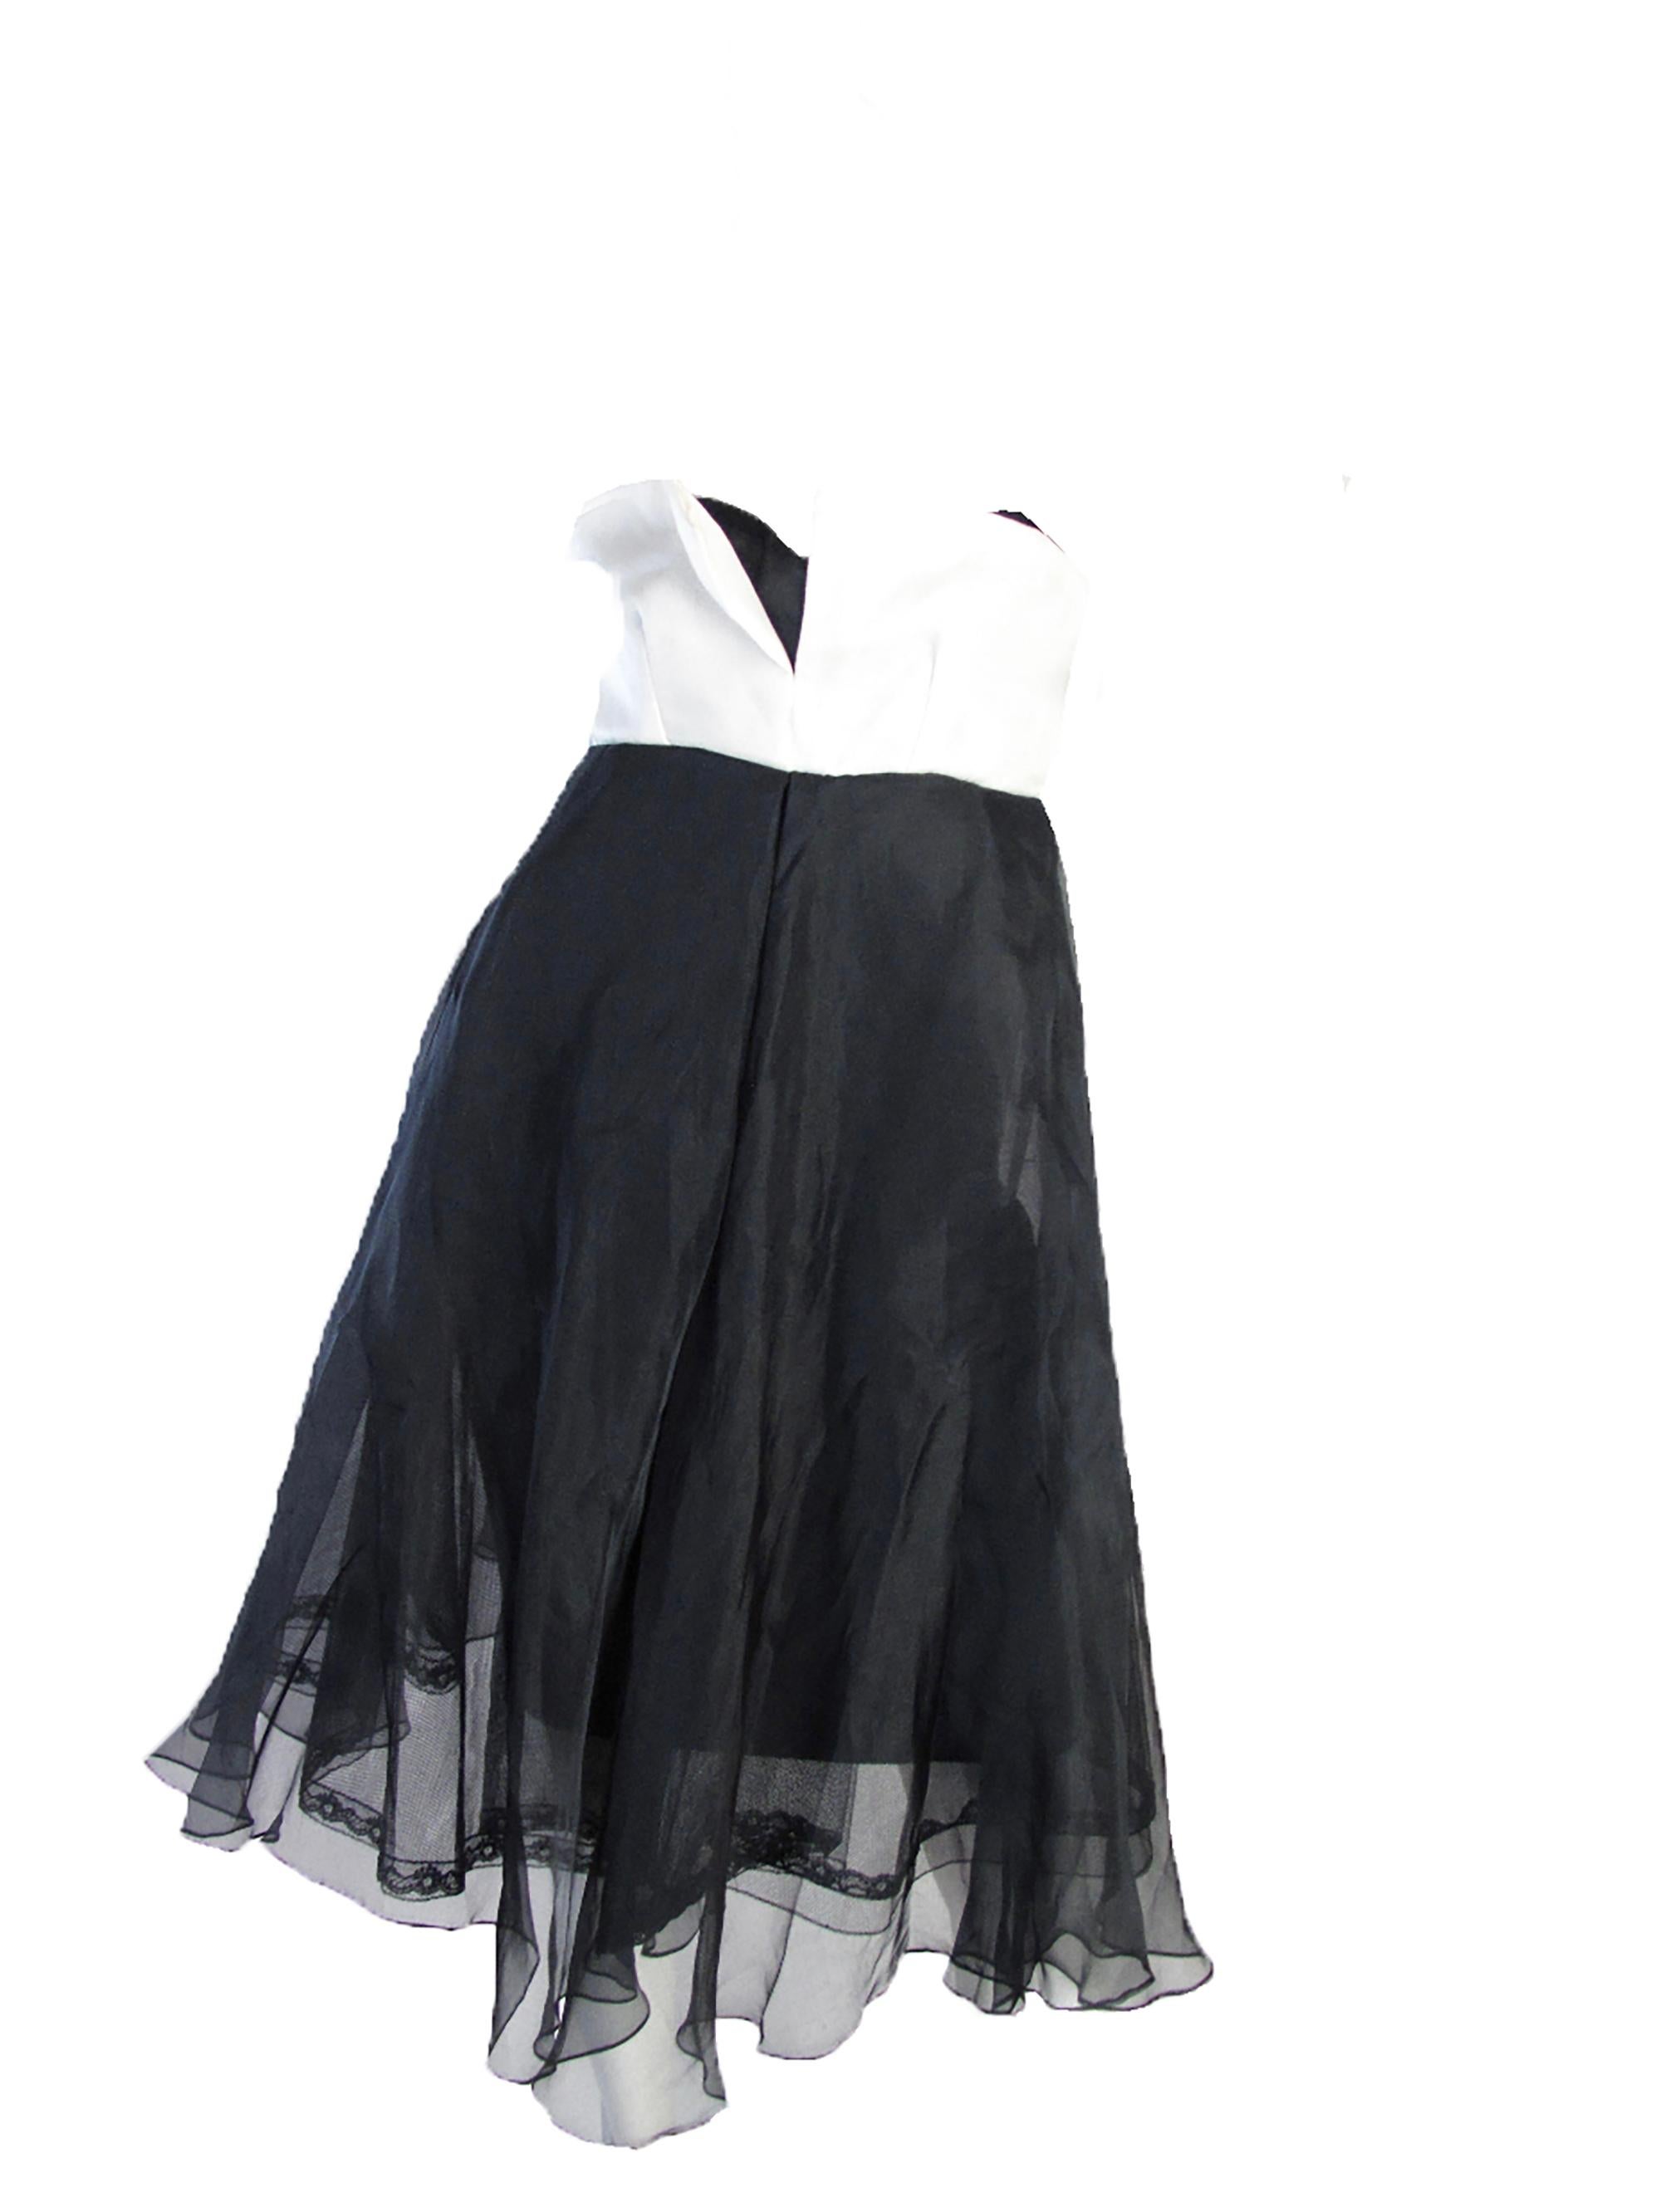 Christian Dior Couture strapless tuxedo dress. 
Condition: Very good. Sz 4
